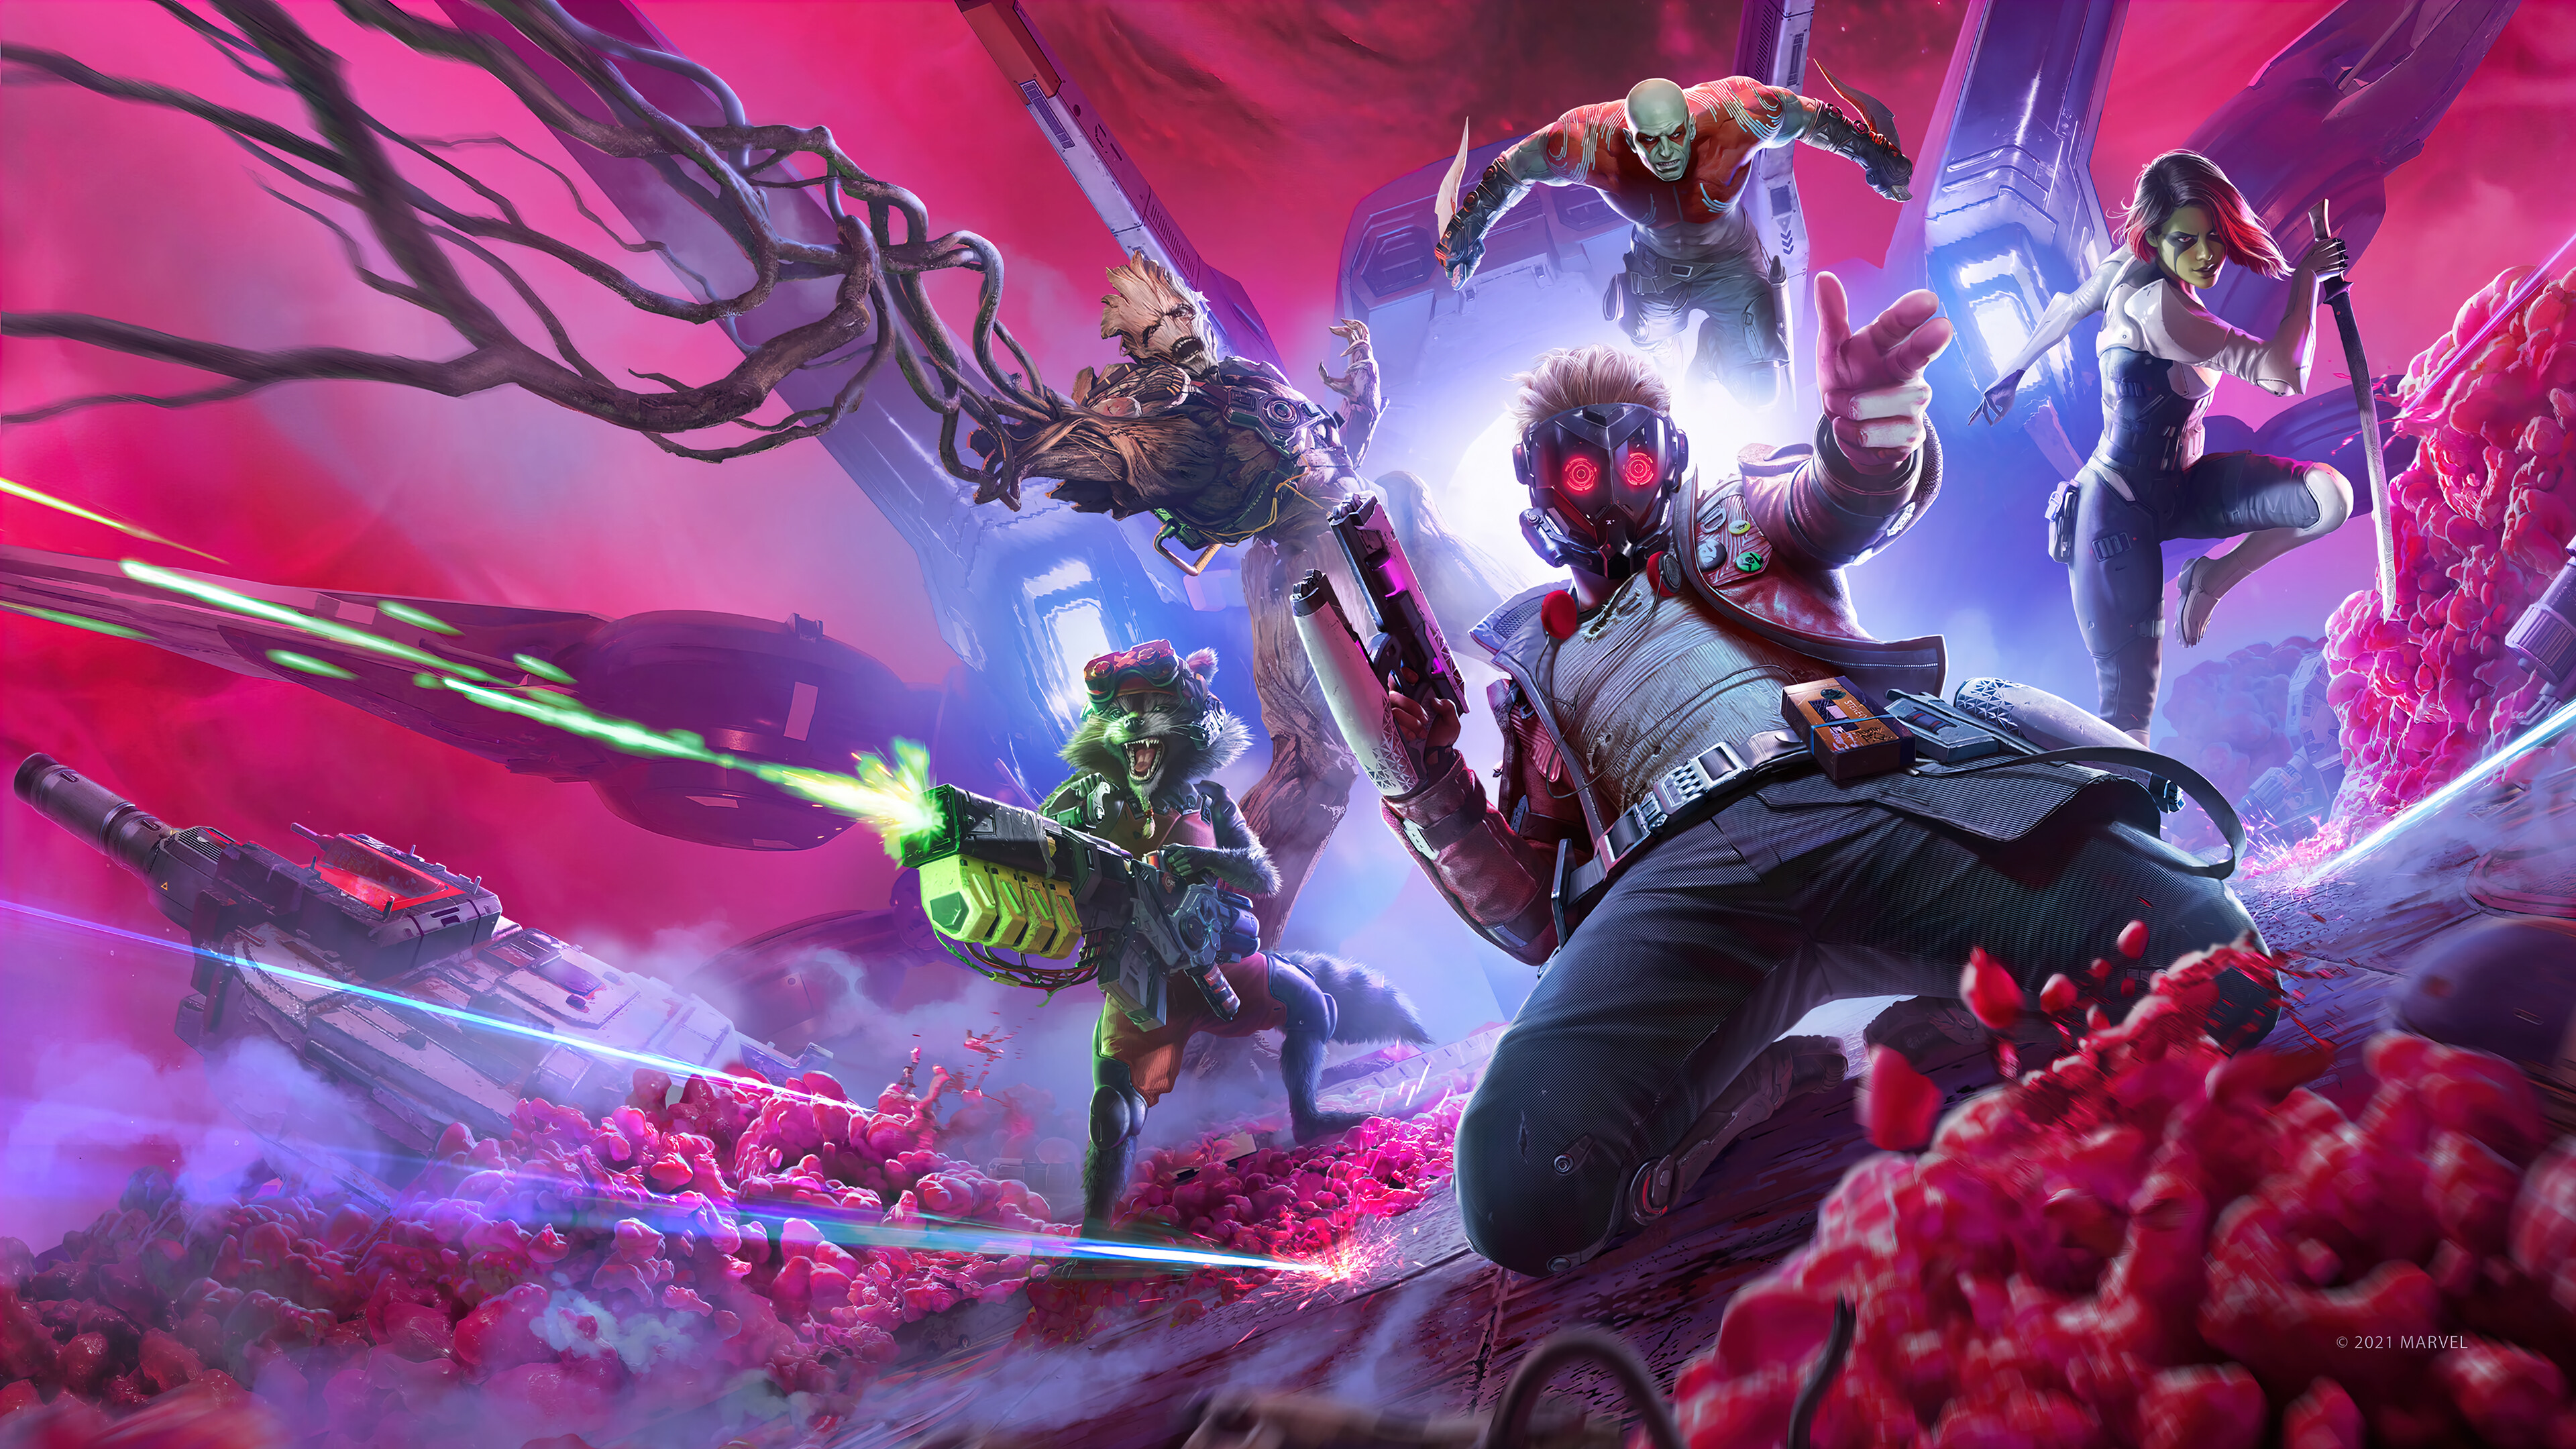 A cosmic miracle: Reviewing the Guardians of the Galaxy game